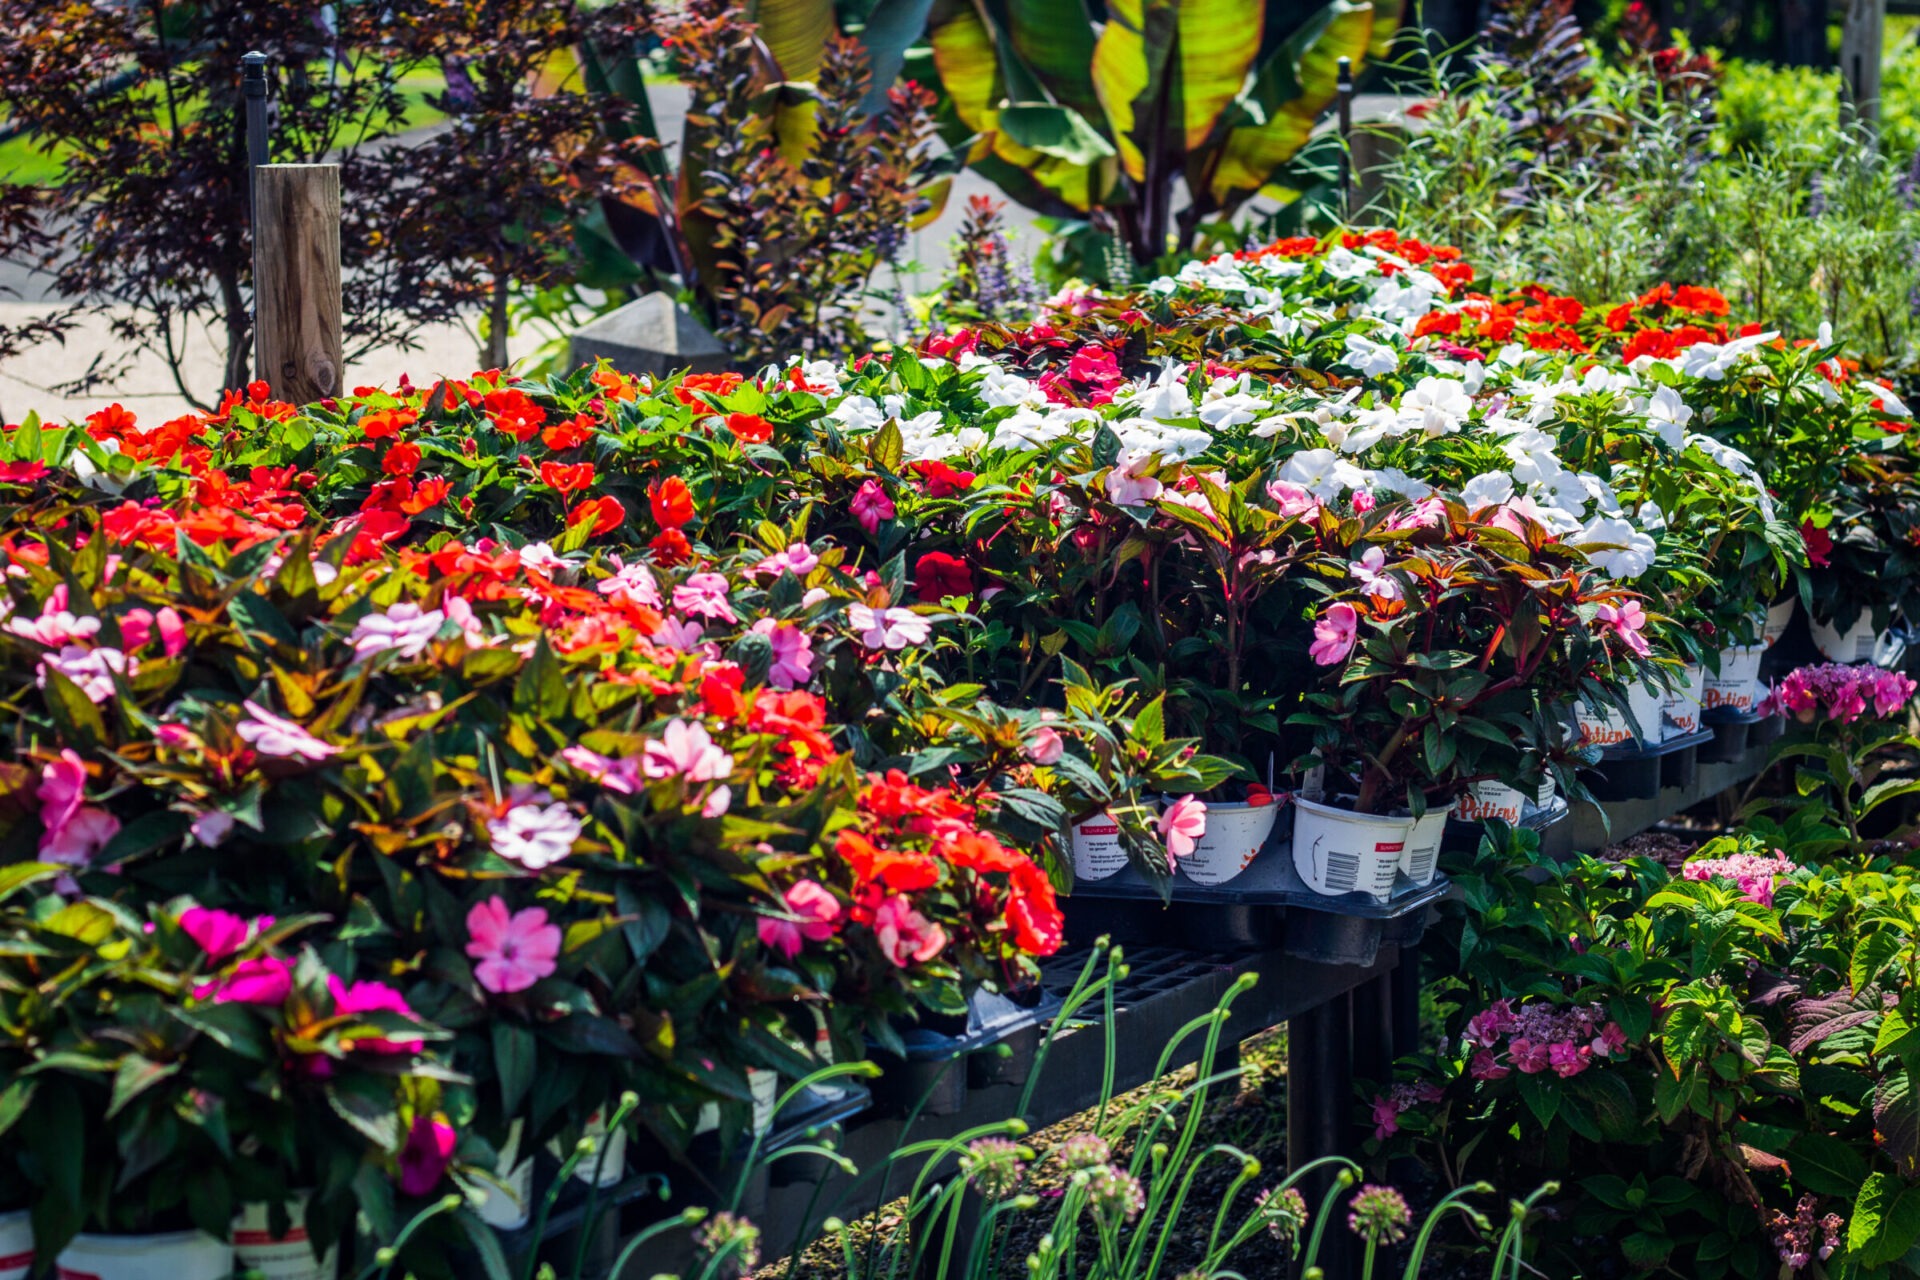 Vibrant clusters of red, white, and pink flowers in pots arranged neatly in an outdoor nursery setting with lush green foliage in the background.